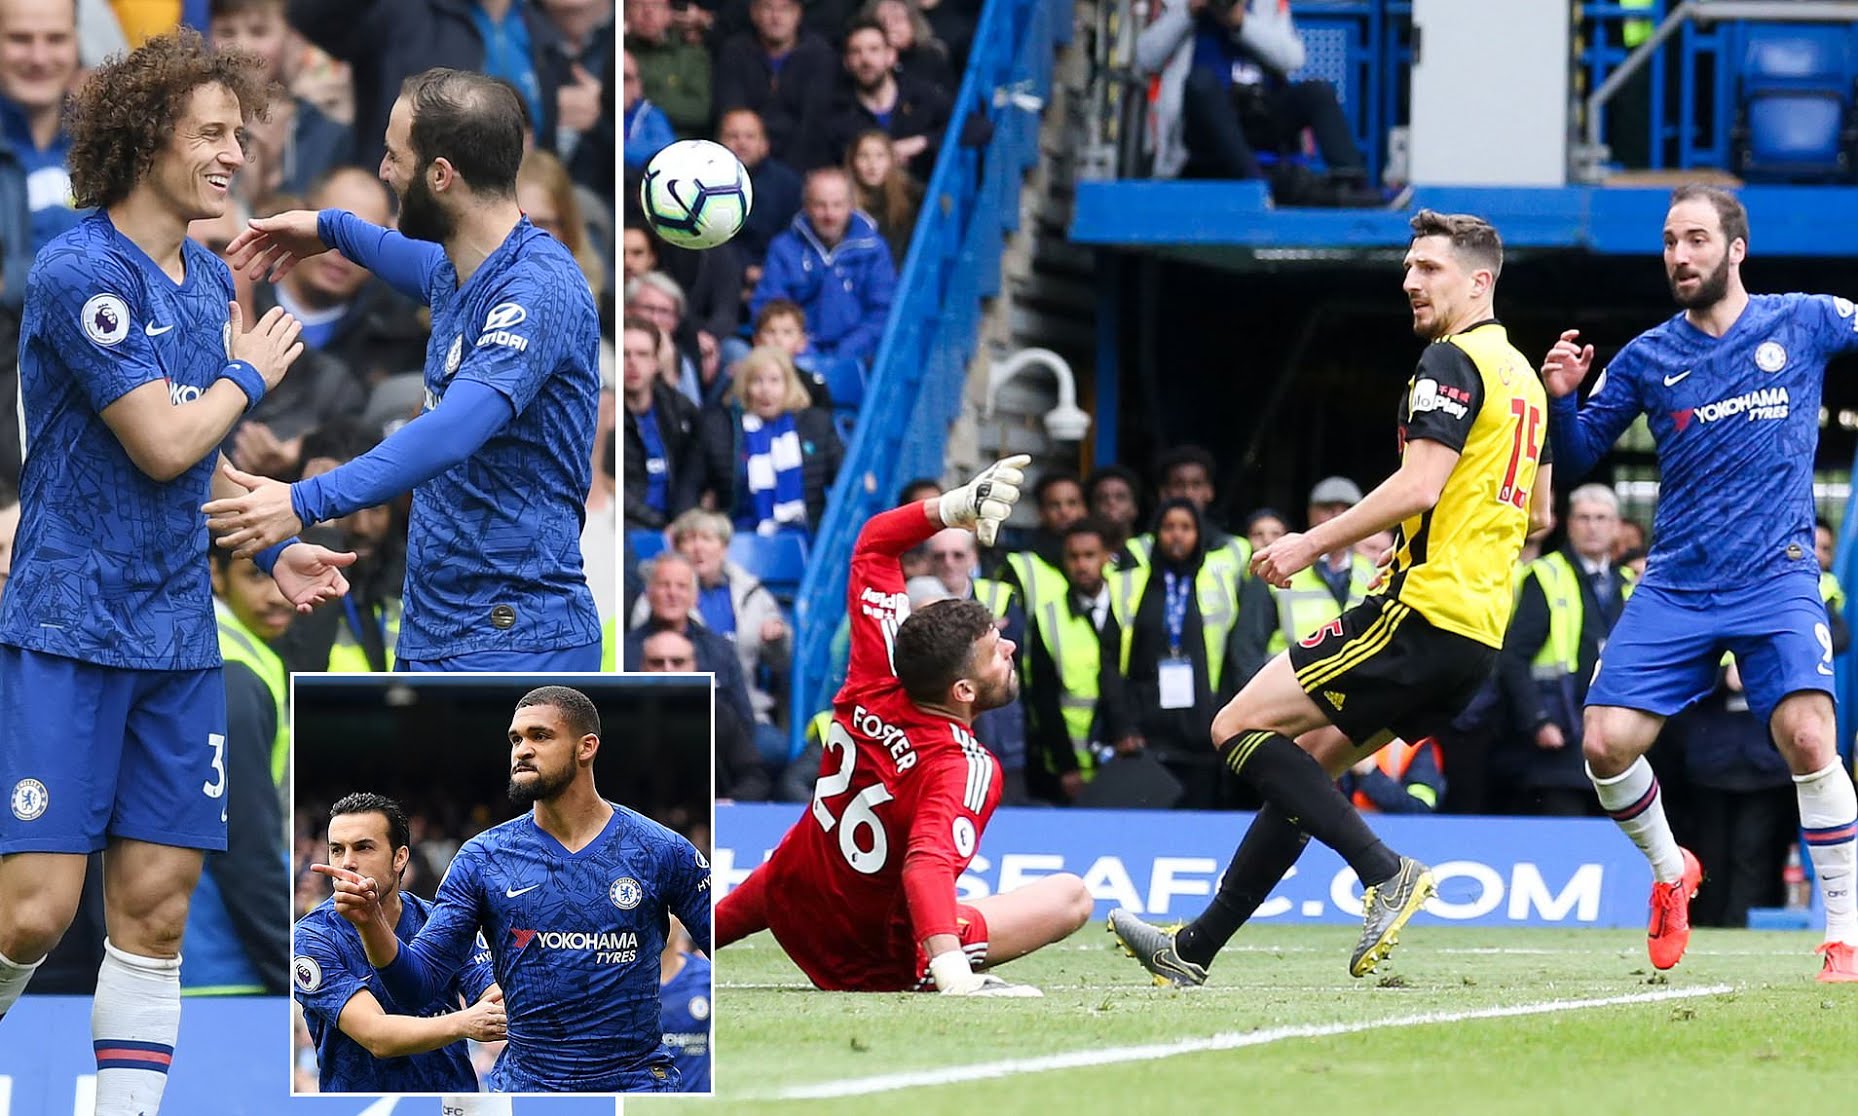 Success Makes 20th Sub Appearance In Watford’s Loss To Chelsea